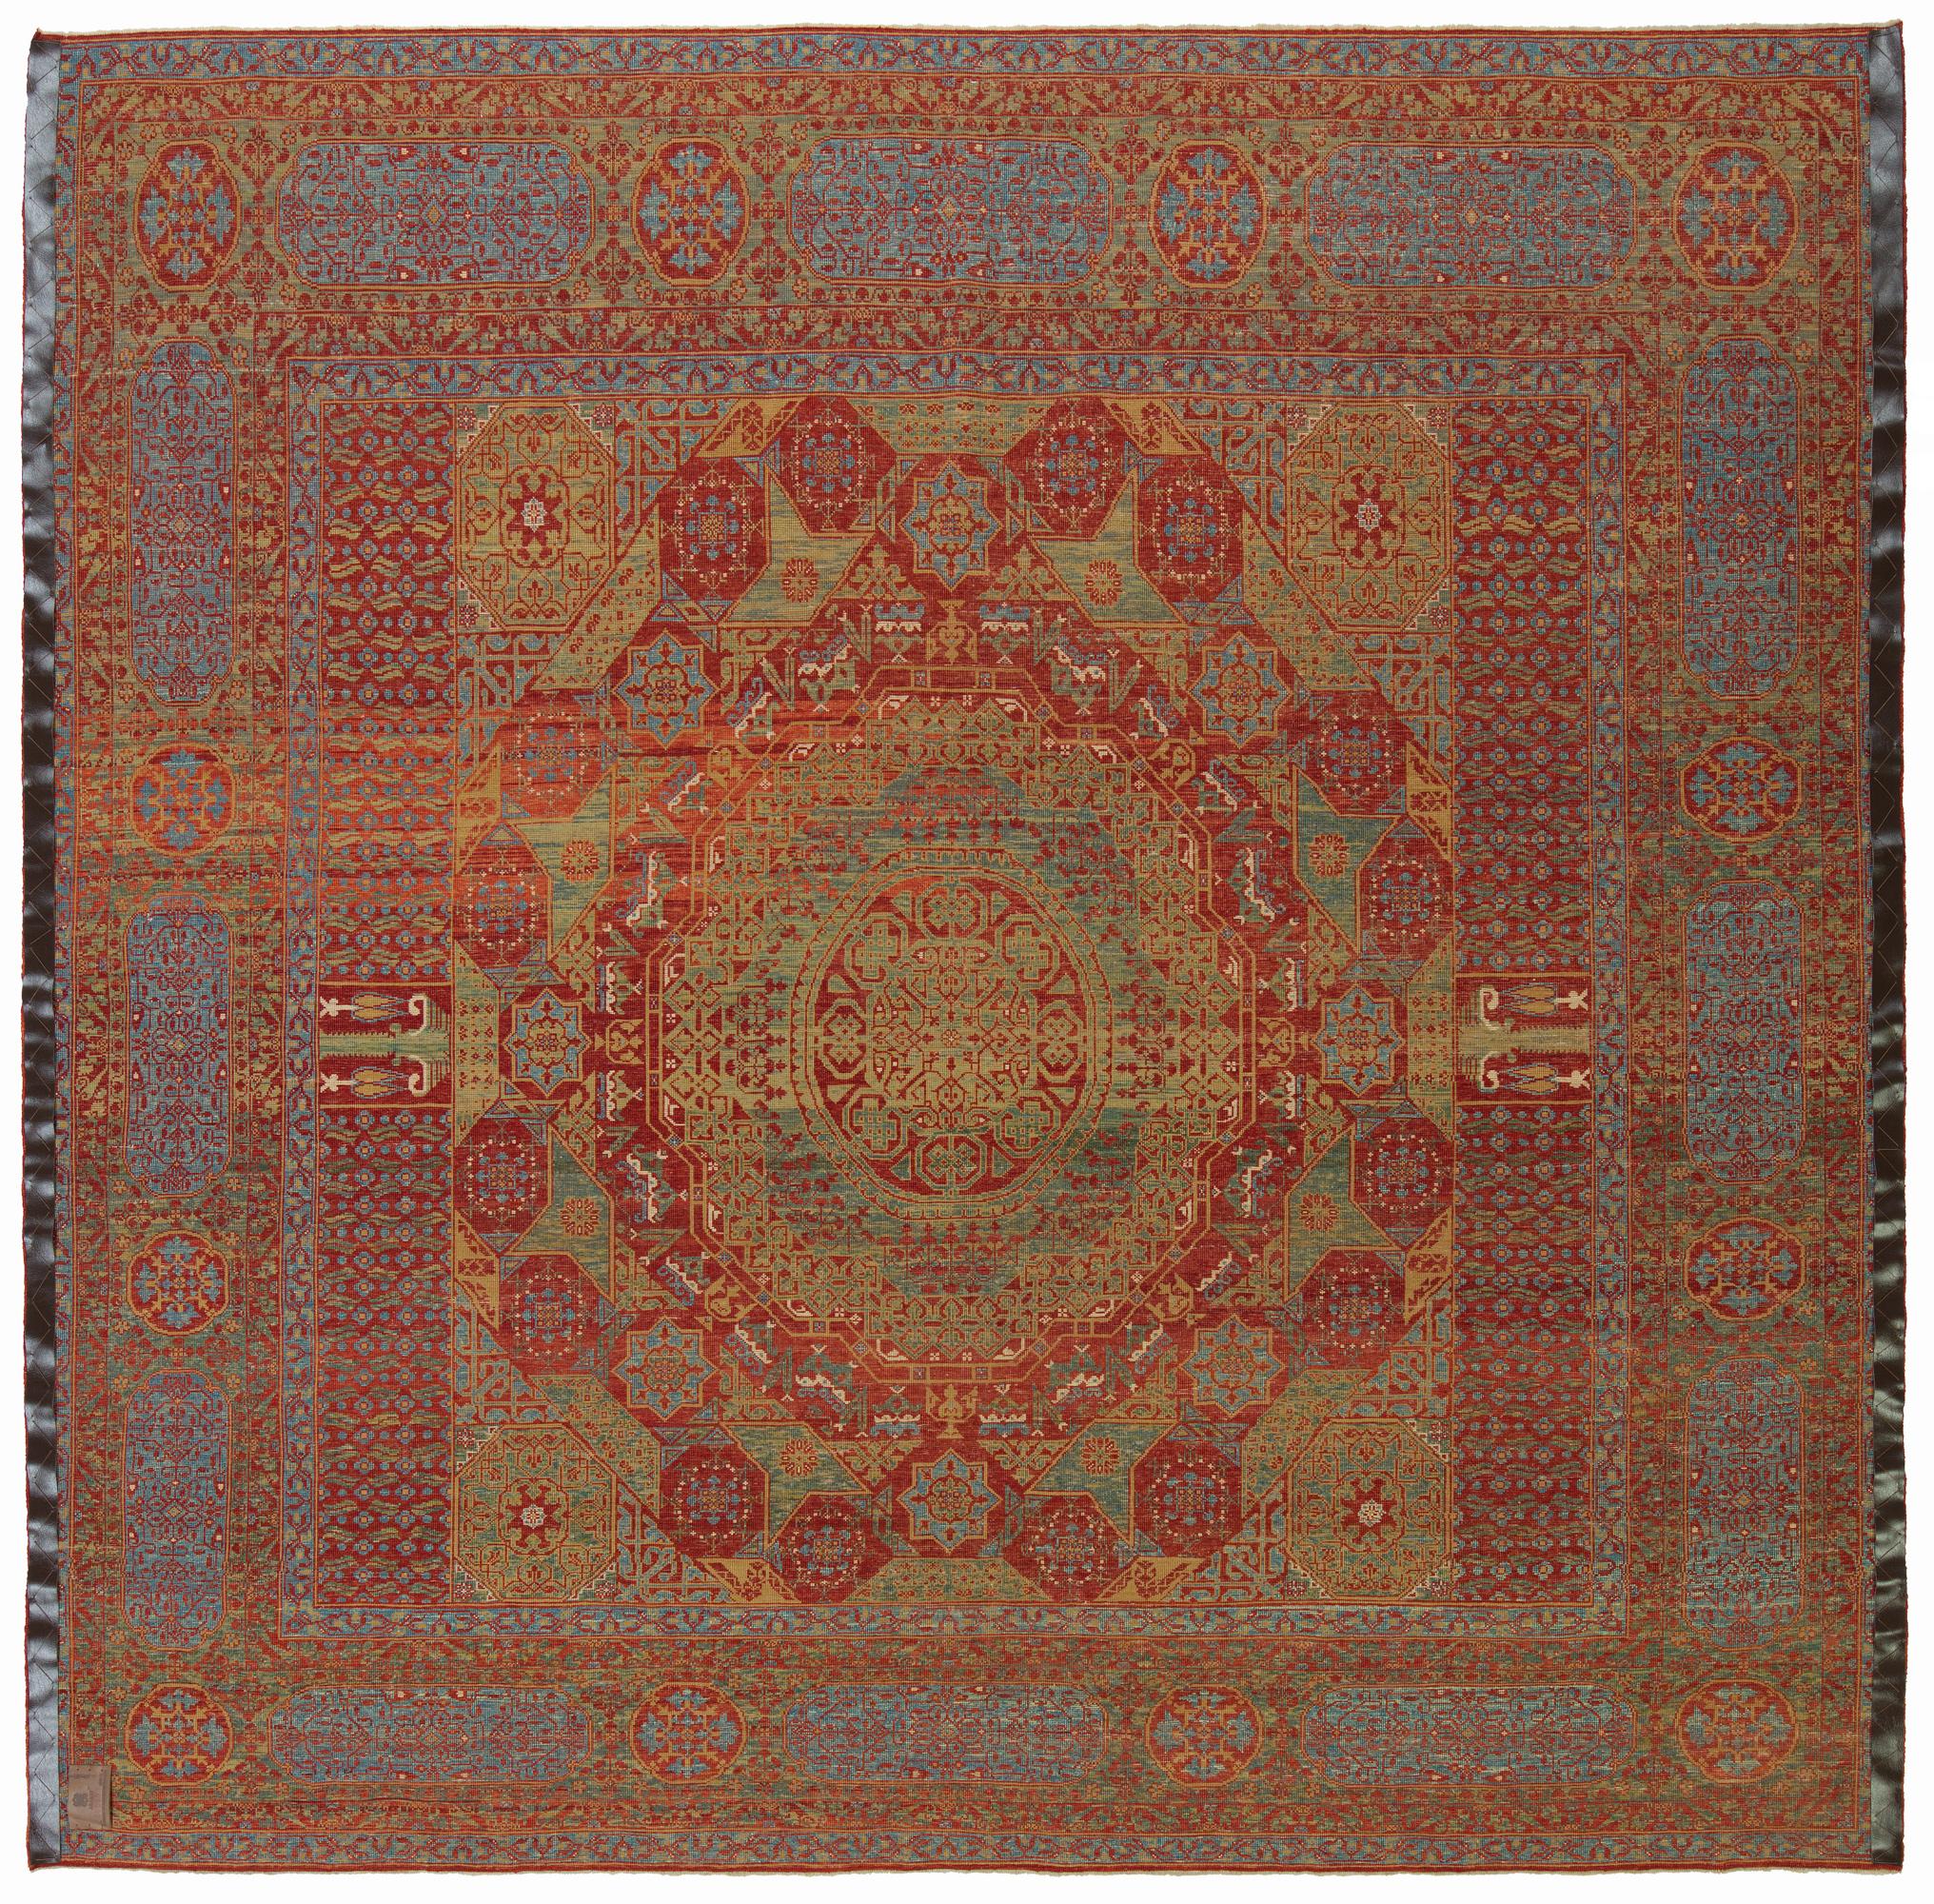 The design source of the carpet comes from the book How to Read – Islamic Carpets, Walter B. Denny, The Metropolitan Museum of Art, New York 2014 fig.61,62. The five-star-medallion carpet was designed in the early 16th century by Mamluk Sultane of